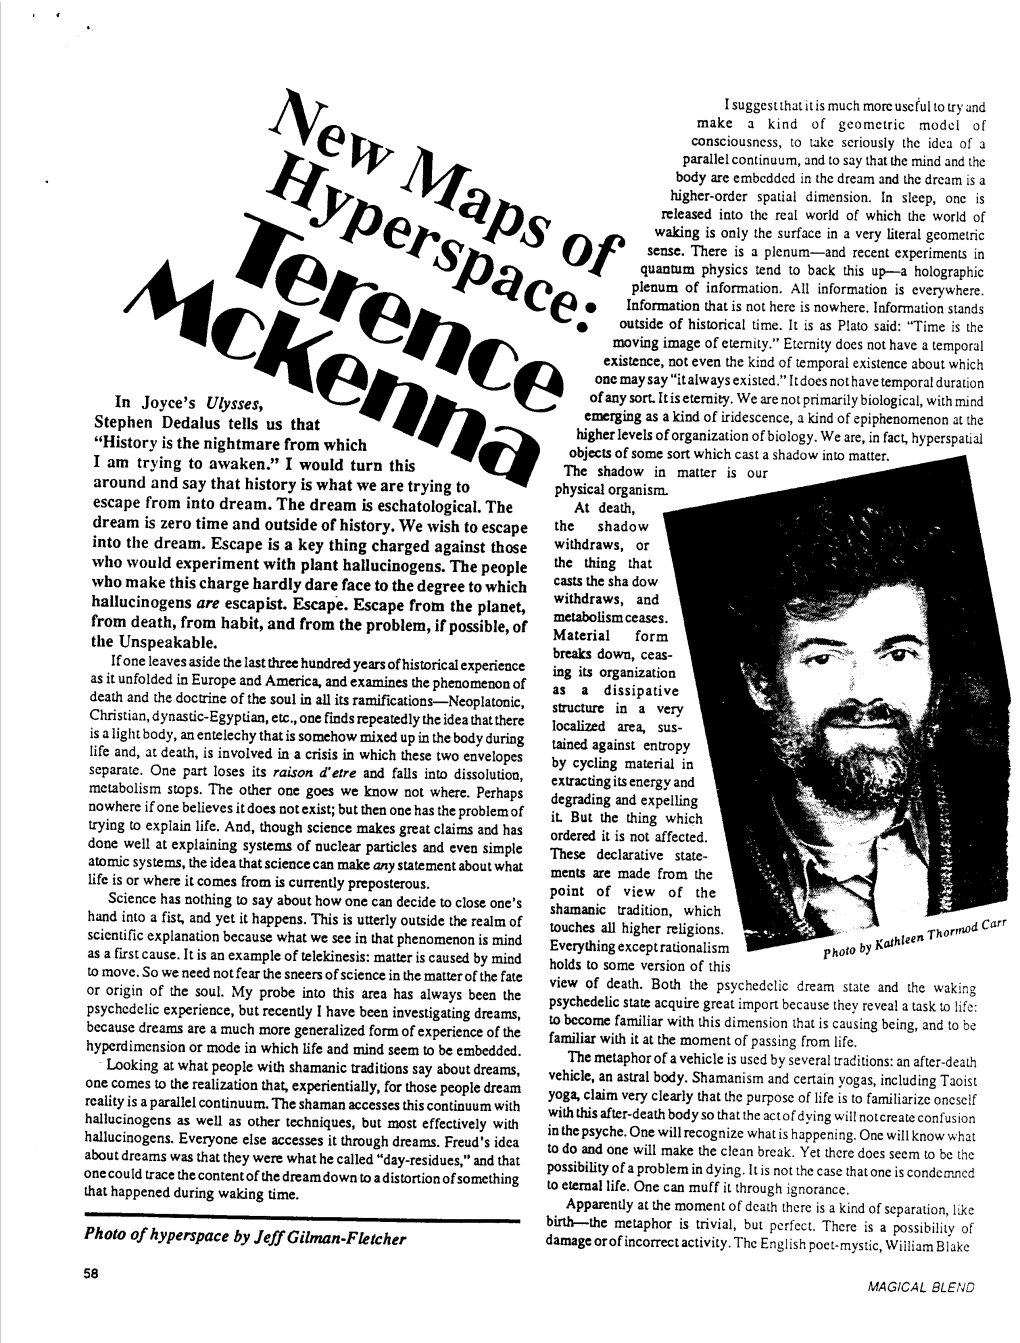 New Maps of Hyperspace : Terence Mckenna